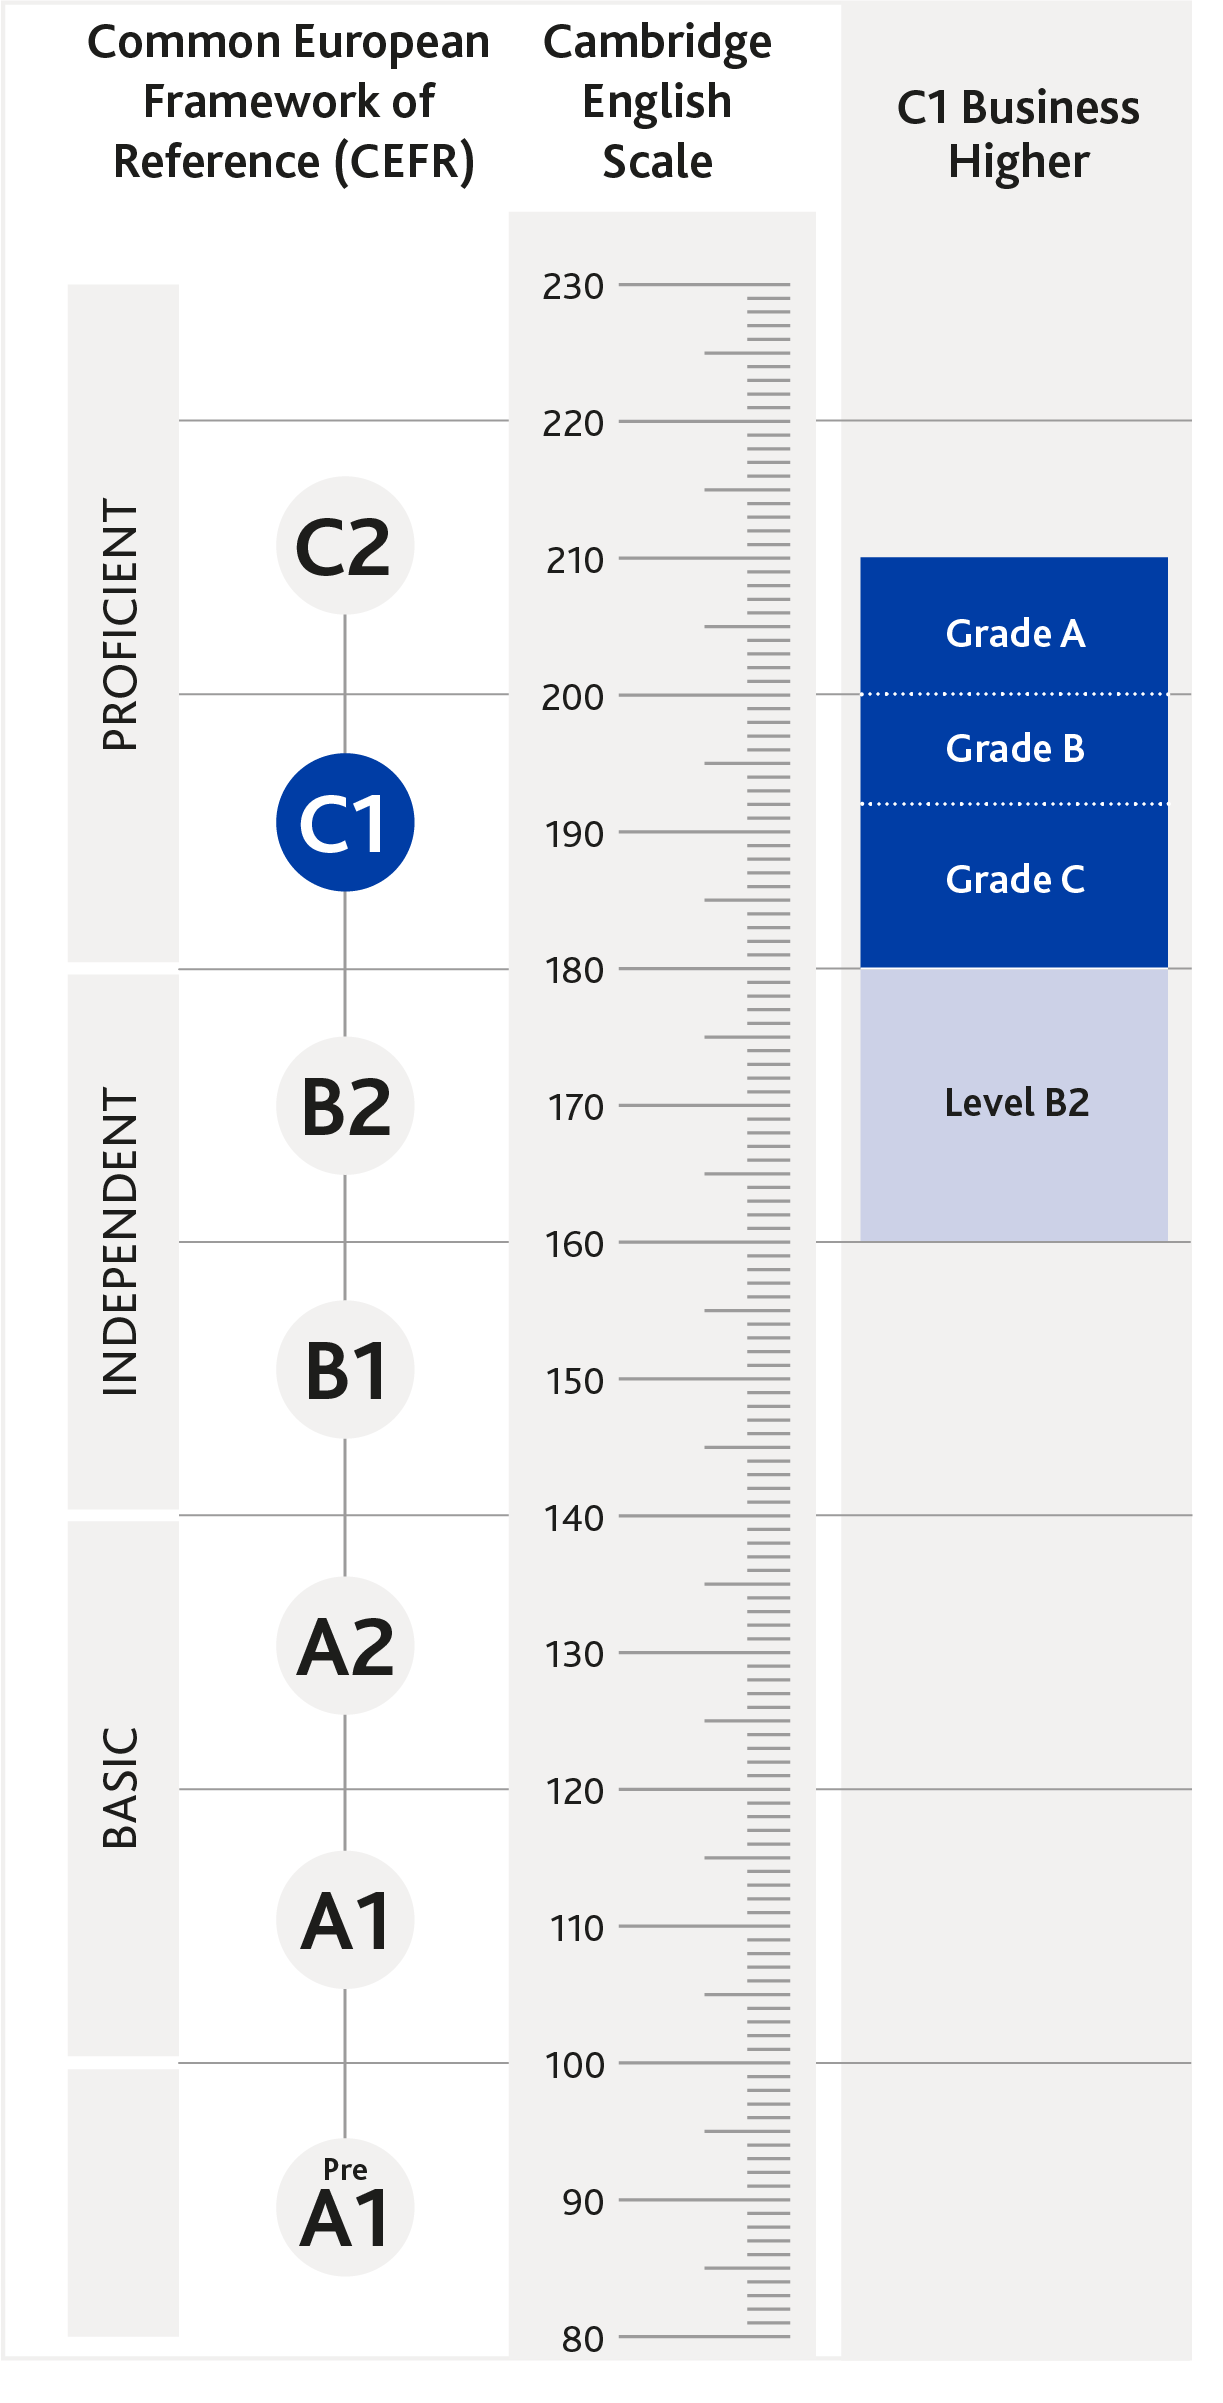 Diagram of where C1 Business Higher is aligned on the CEFR and the Cambridge English Scale